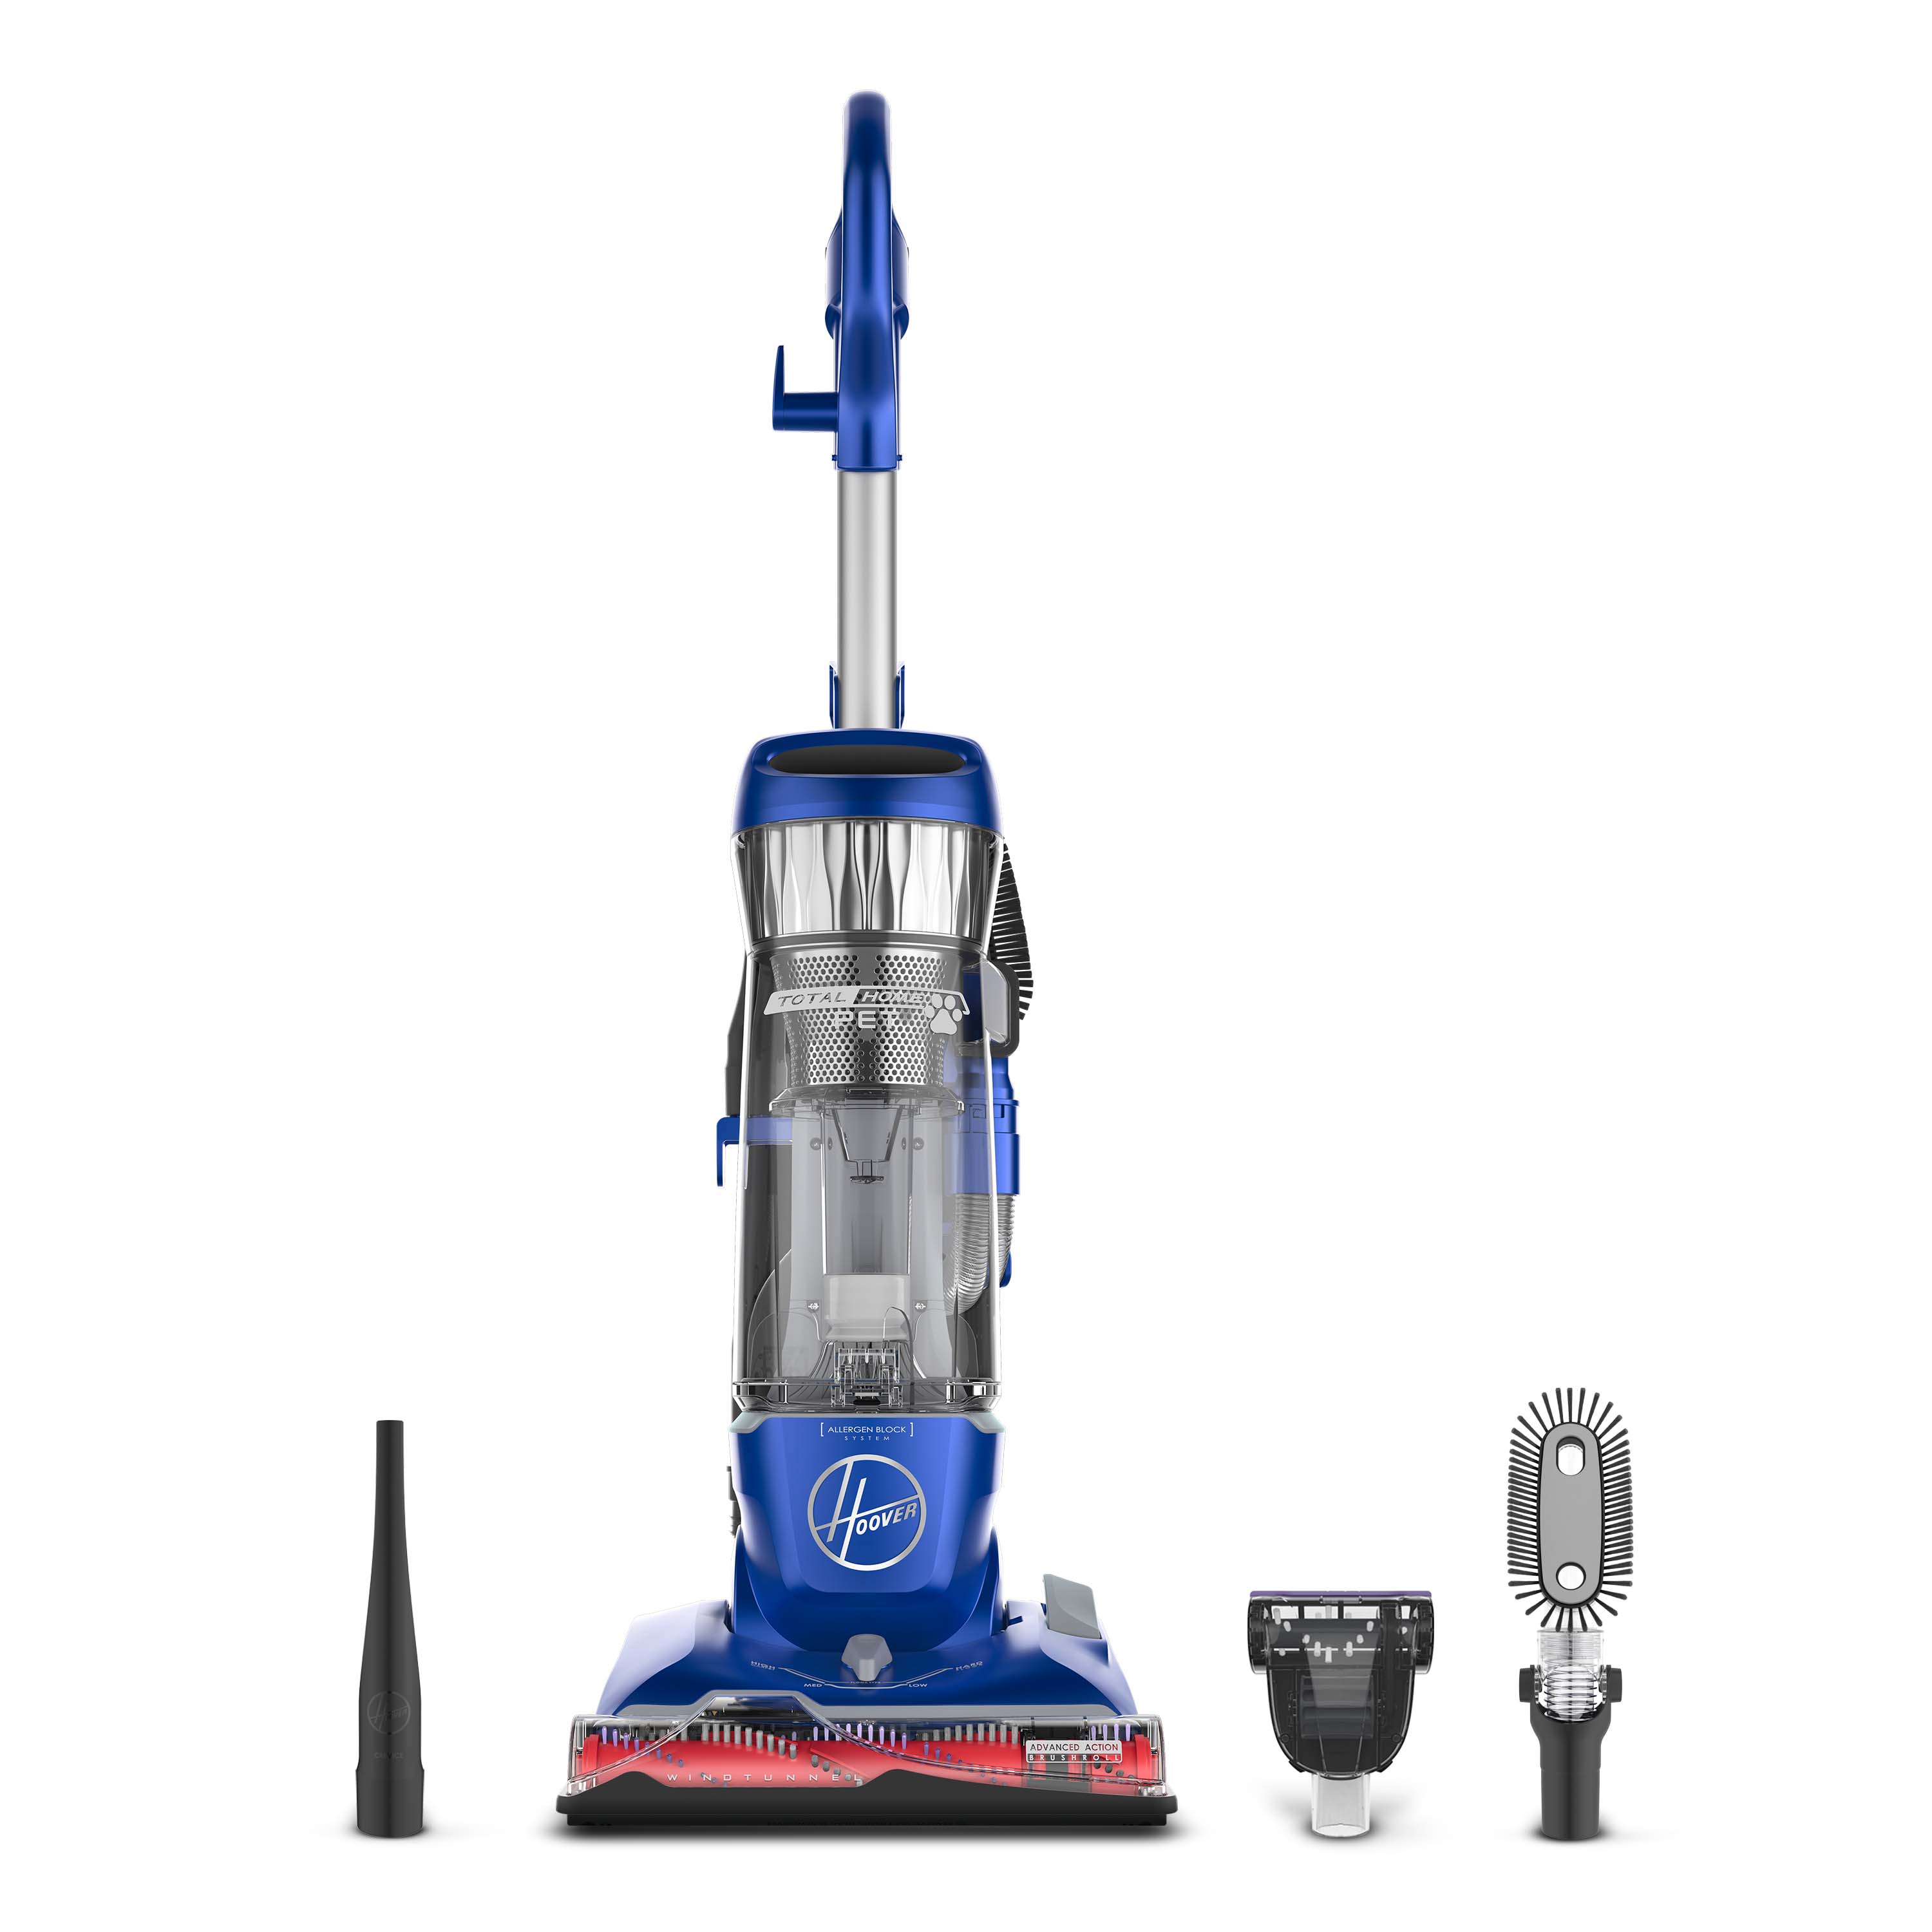 Hoover Total Home Pet Max Life Bagless Upright Vacuum Cleaner, UH74100, New Condition - image 3 of 13